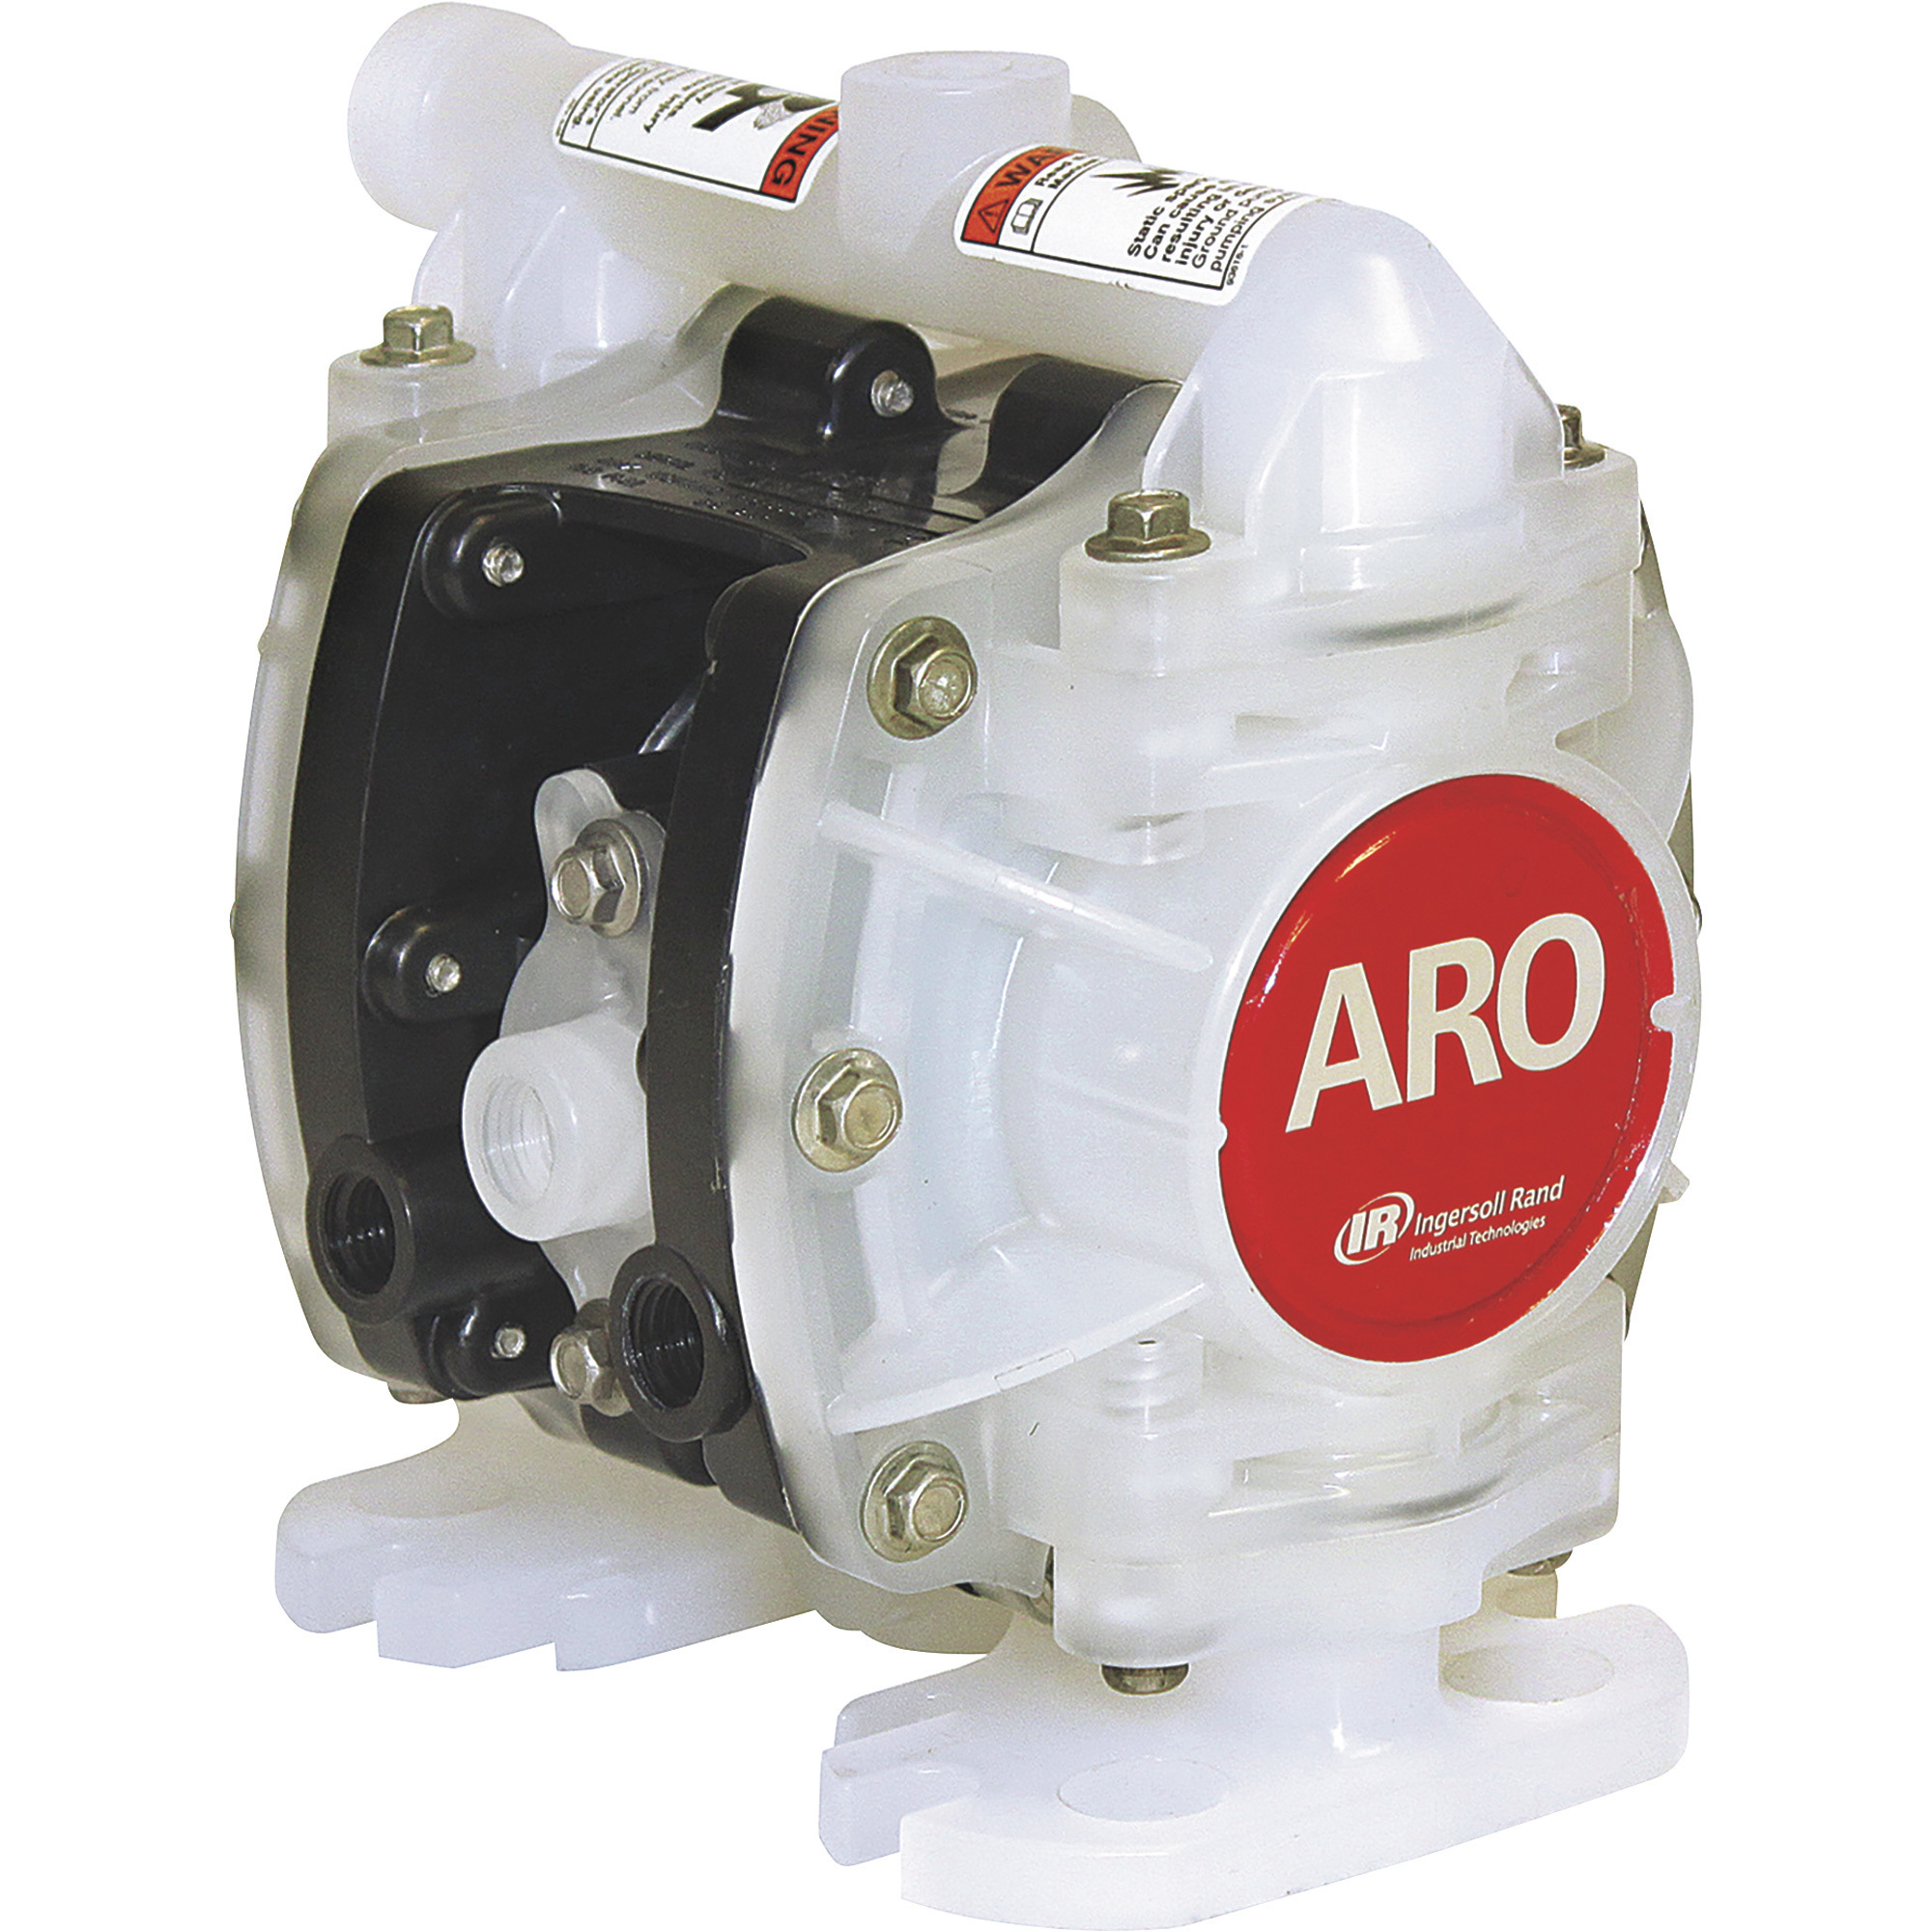 ARO Air-Operated Double Diaphragm Pump, 1/4Inch Ports, 5.3 GPM, Groundable Acetal/PTFE, Model PD01E-HDS-DTT-A